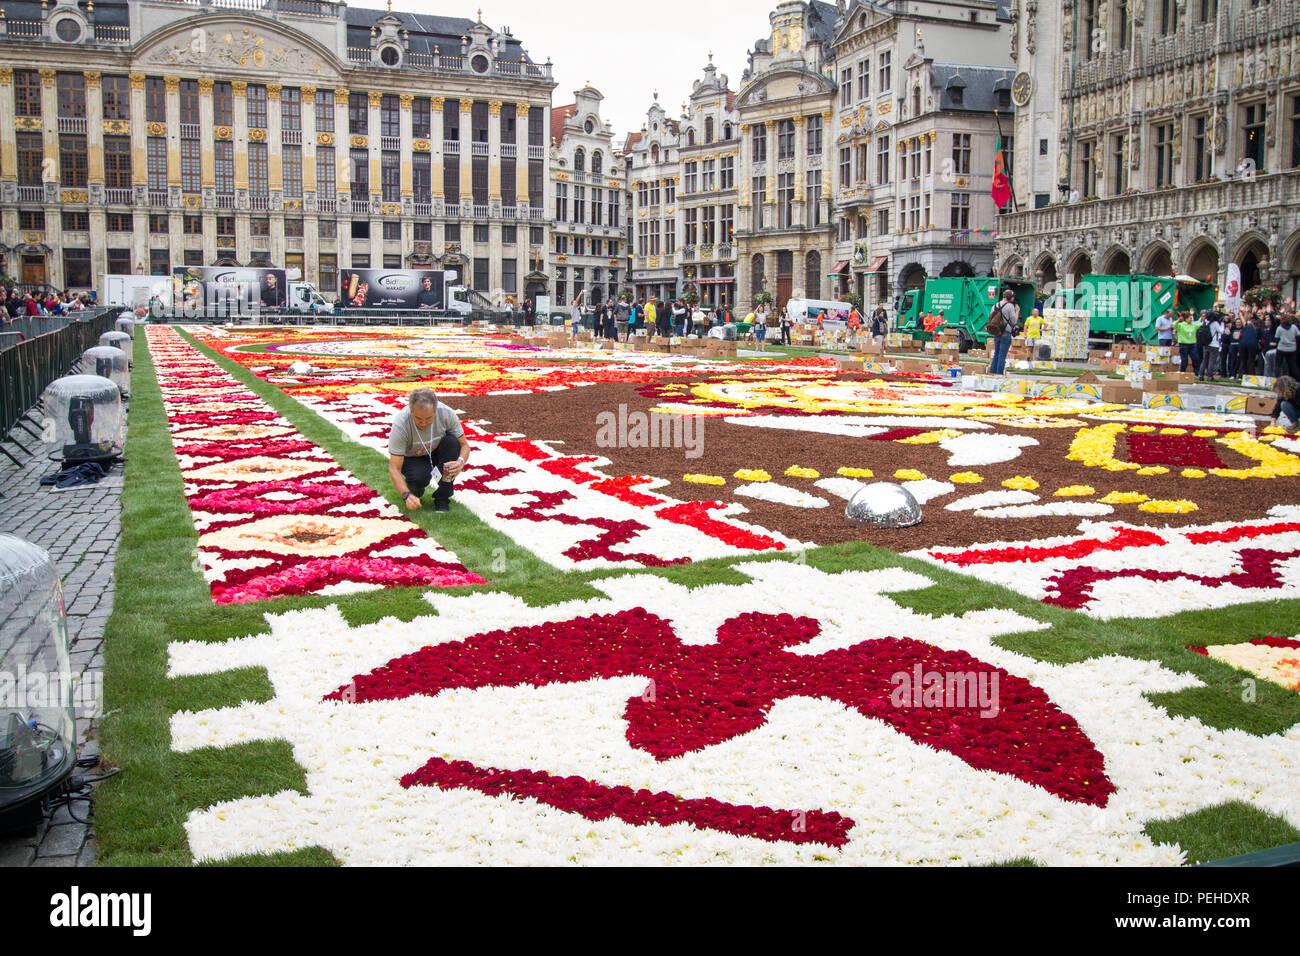 Brussels, Belgium. 16th Aug 2018. Every 2 Years the Grand-Place in Brussels  is covered with a flower carpet. The 2018 theme is Mexico the flower carpet  is dedicated to Guanajuato a Mexican